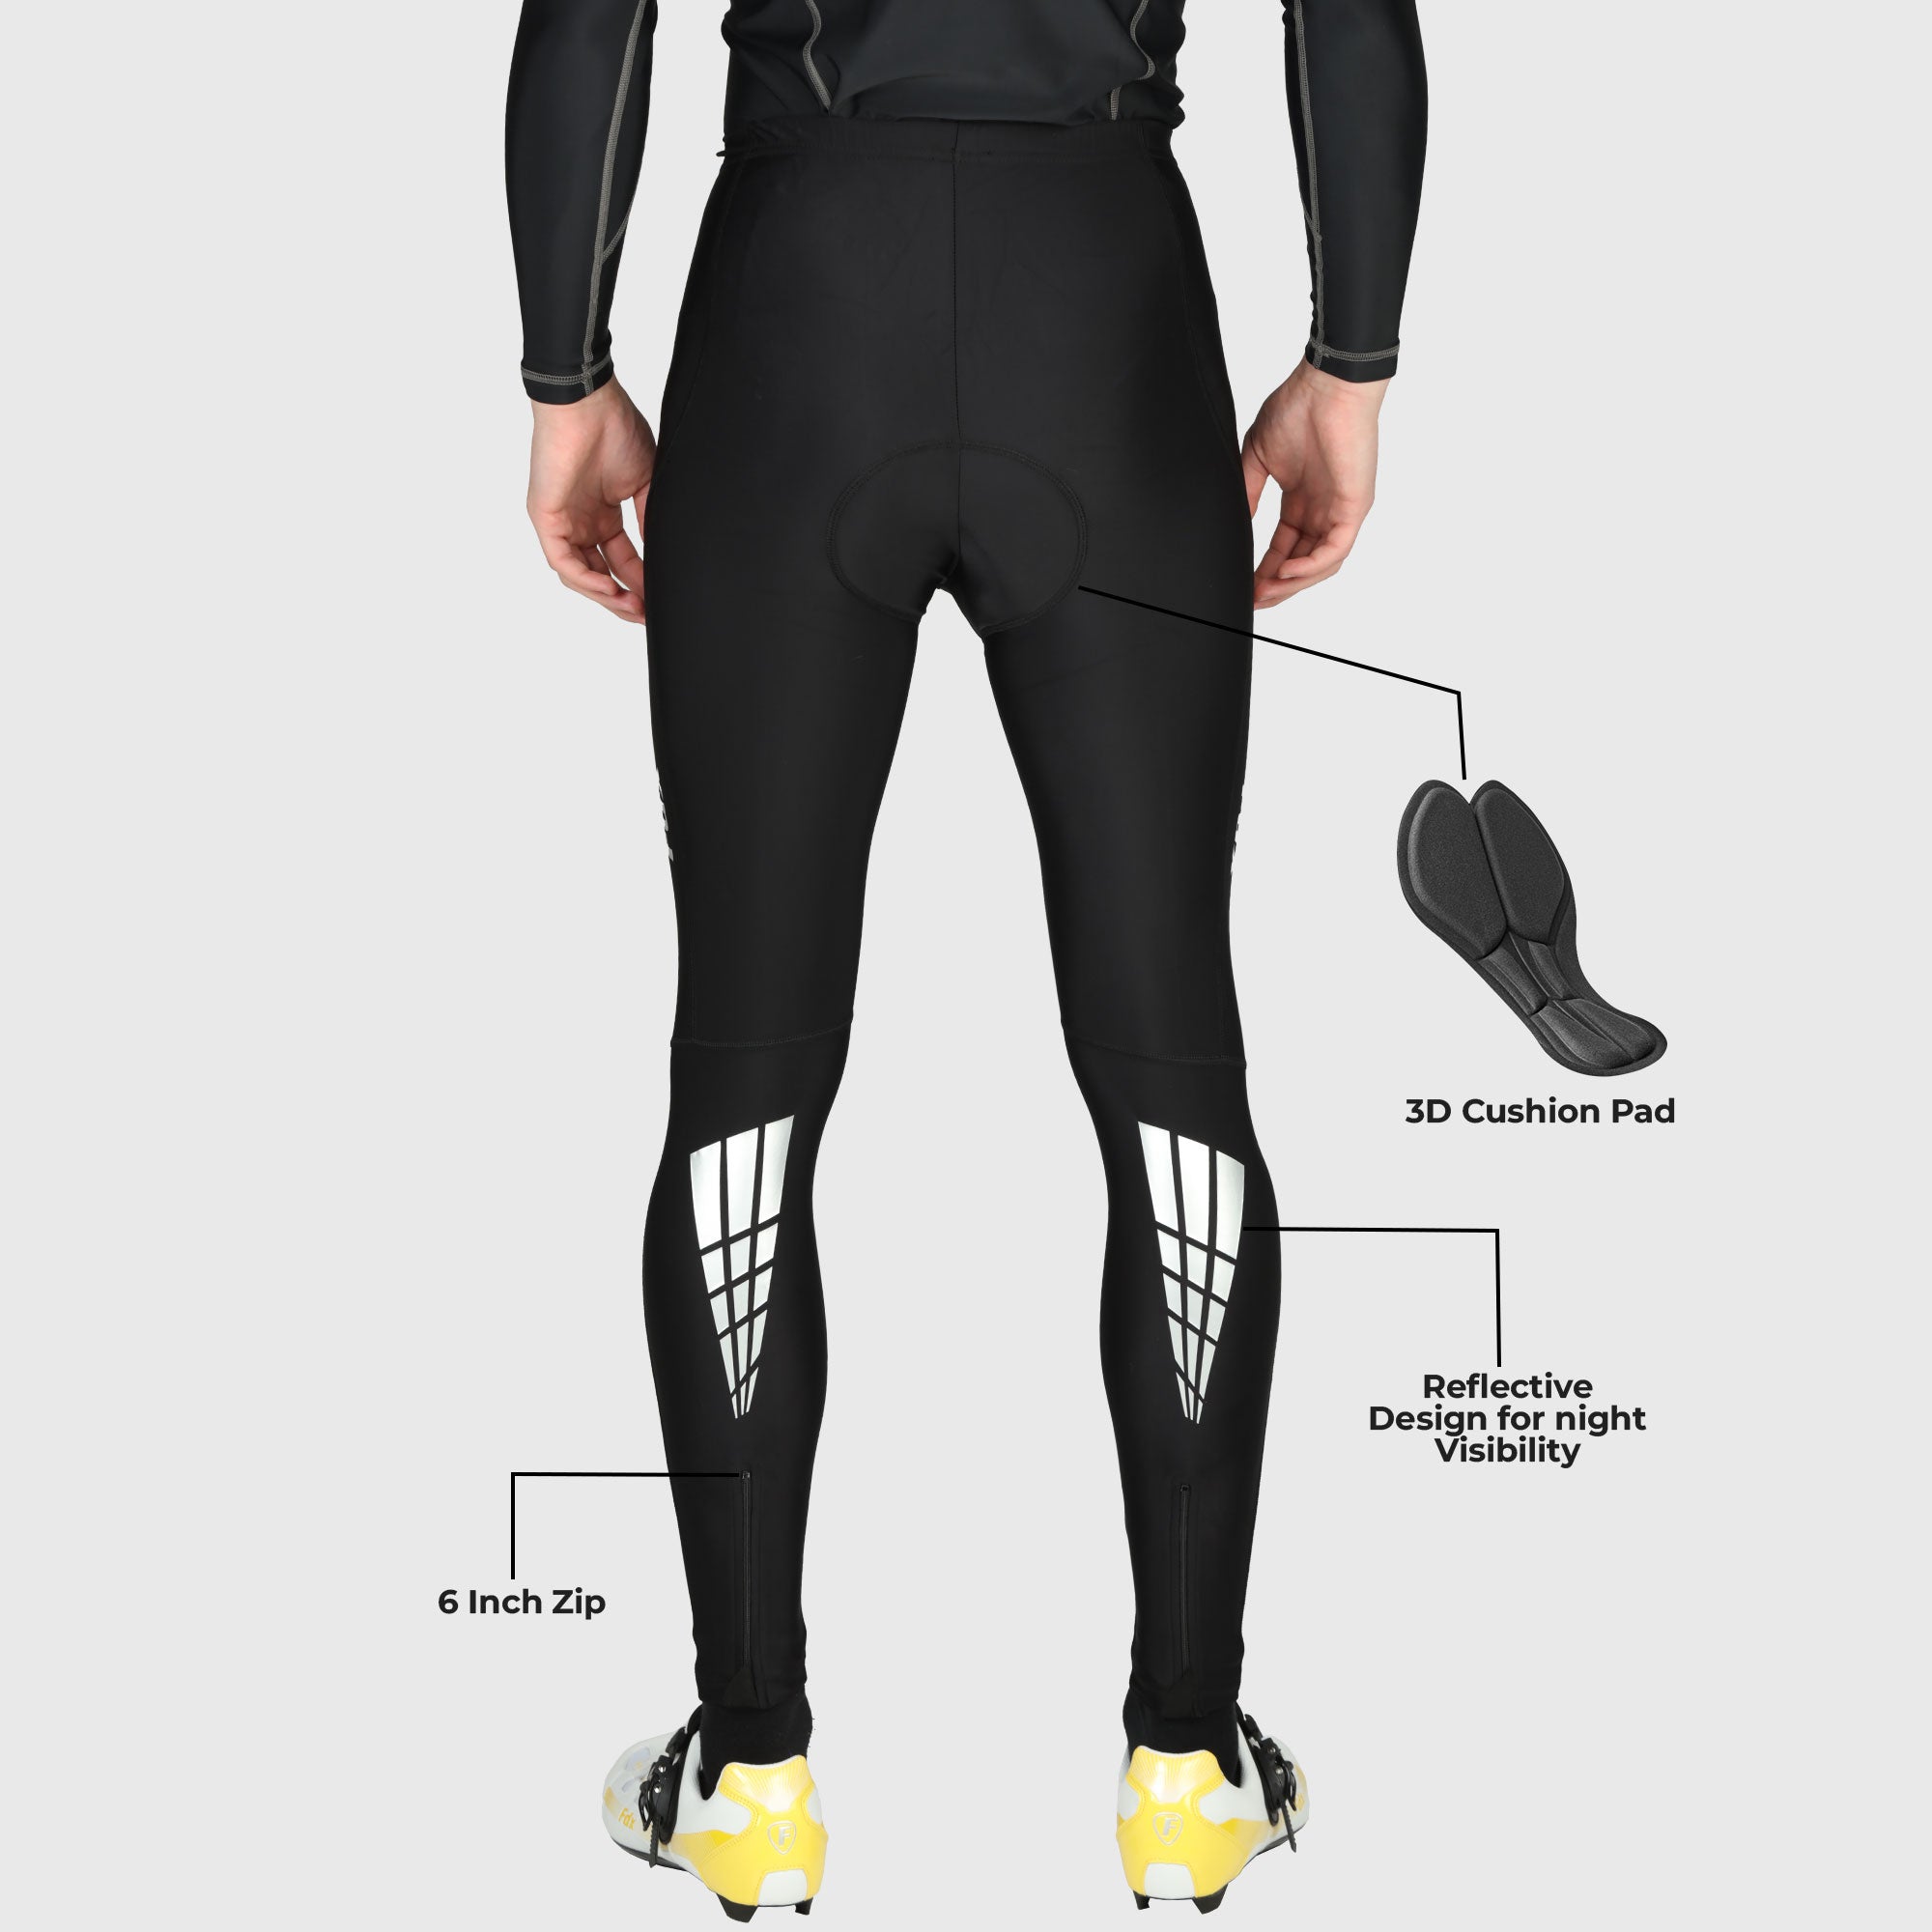 Fdx Heatchaser Black Men's Compression Winter Cycling Tights